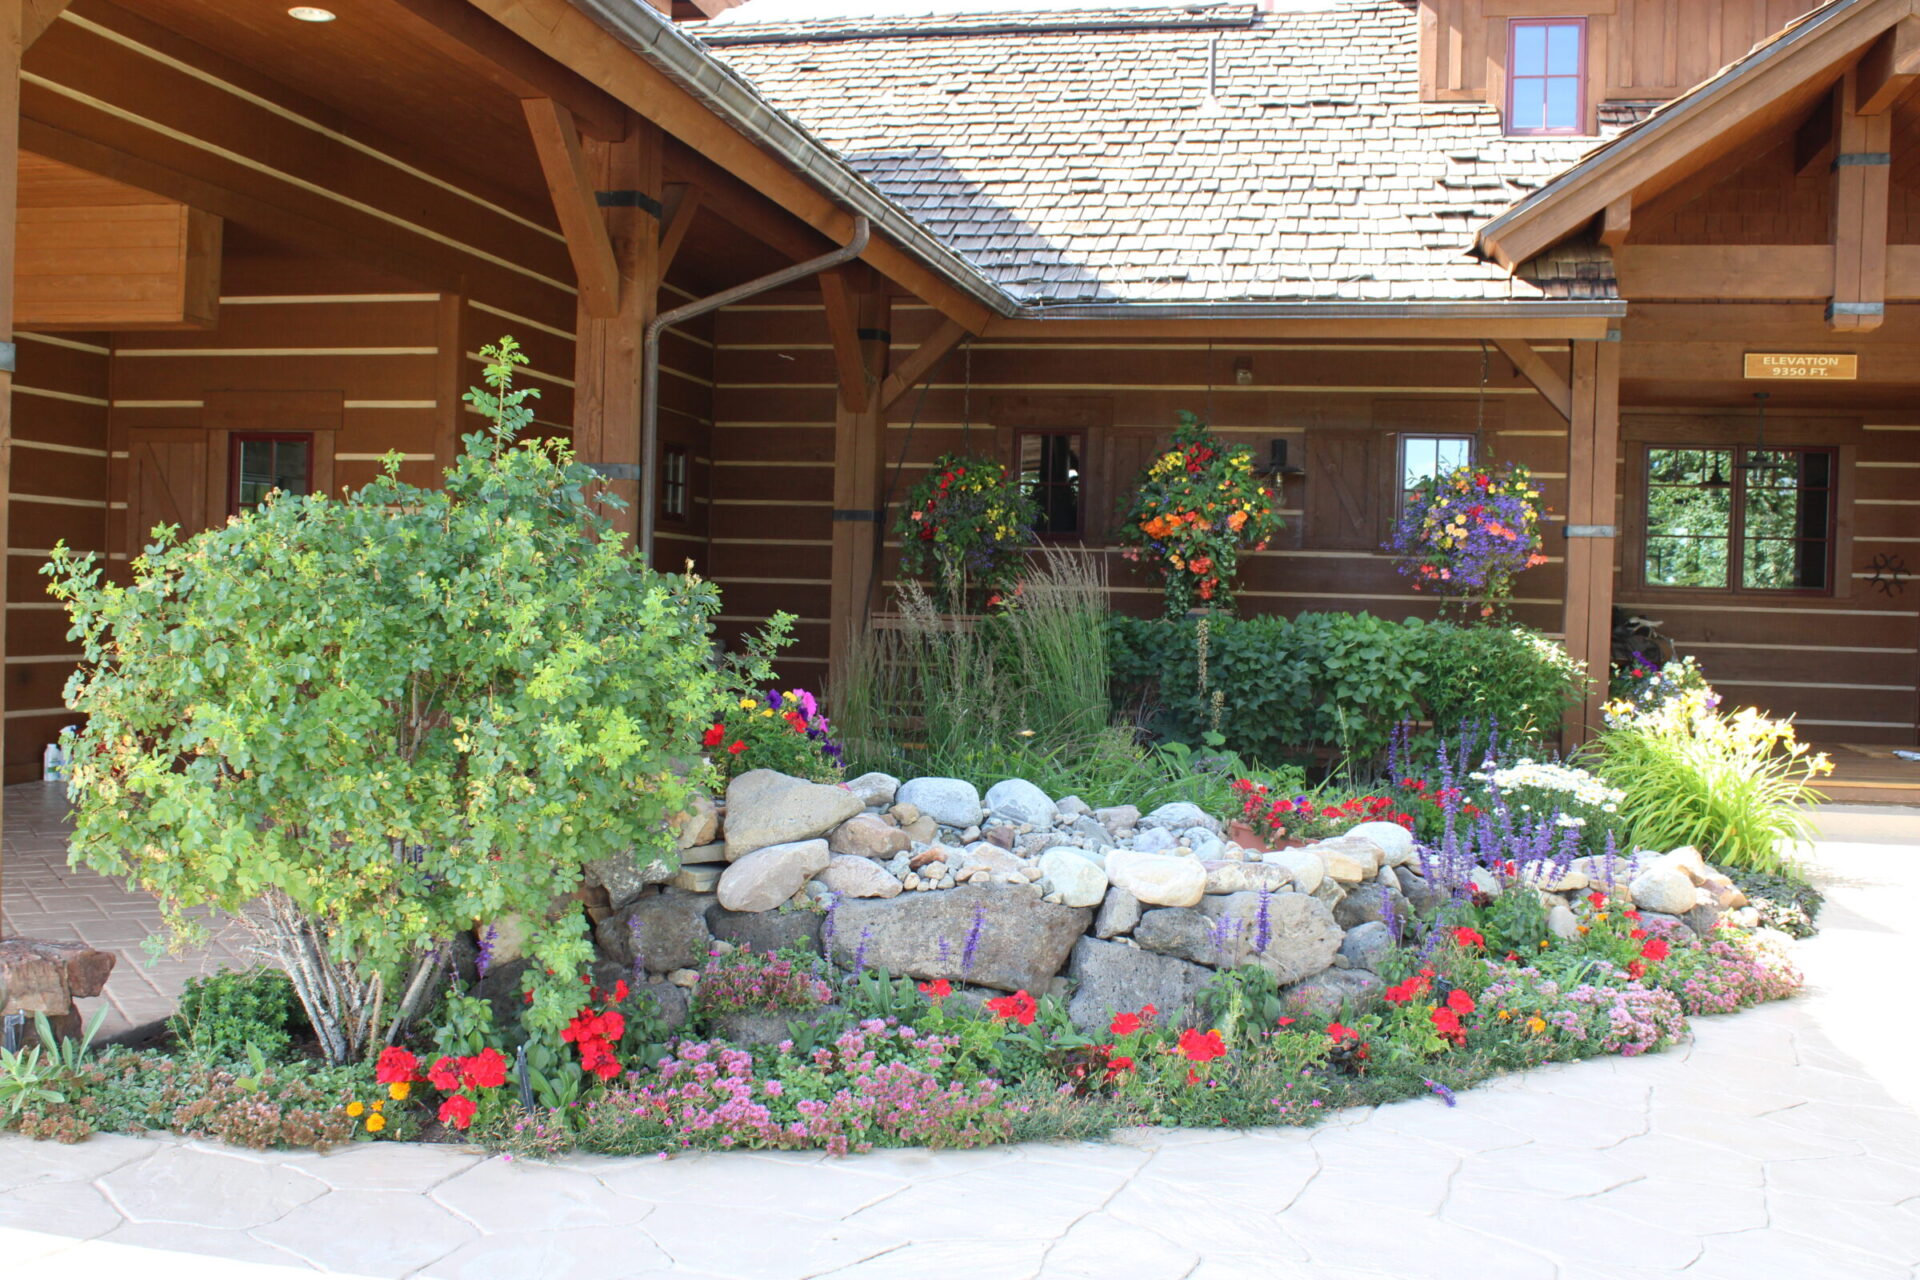 A well-maintained, colorful flowerbed in front of a wooden cabin, featuring various flowers, rock elements, and hanging flower pots under a clear sky.